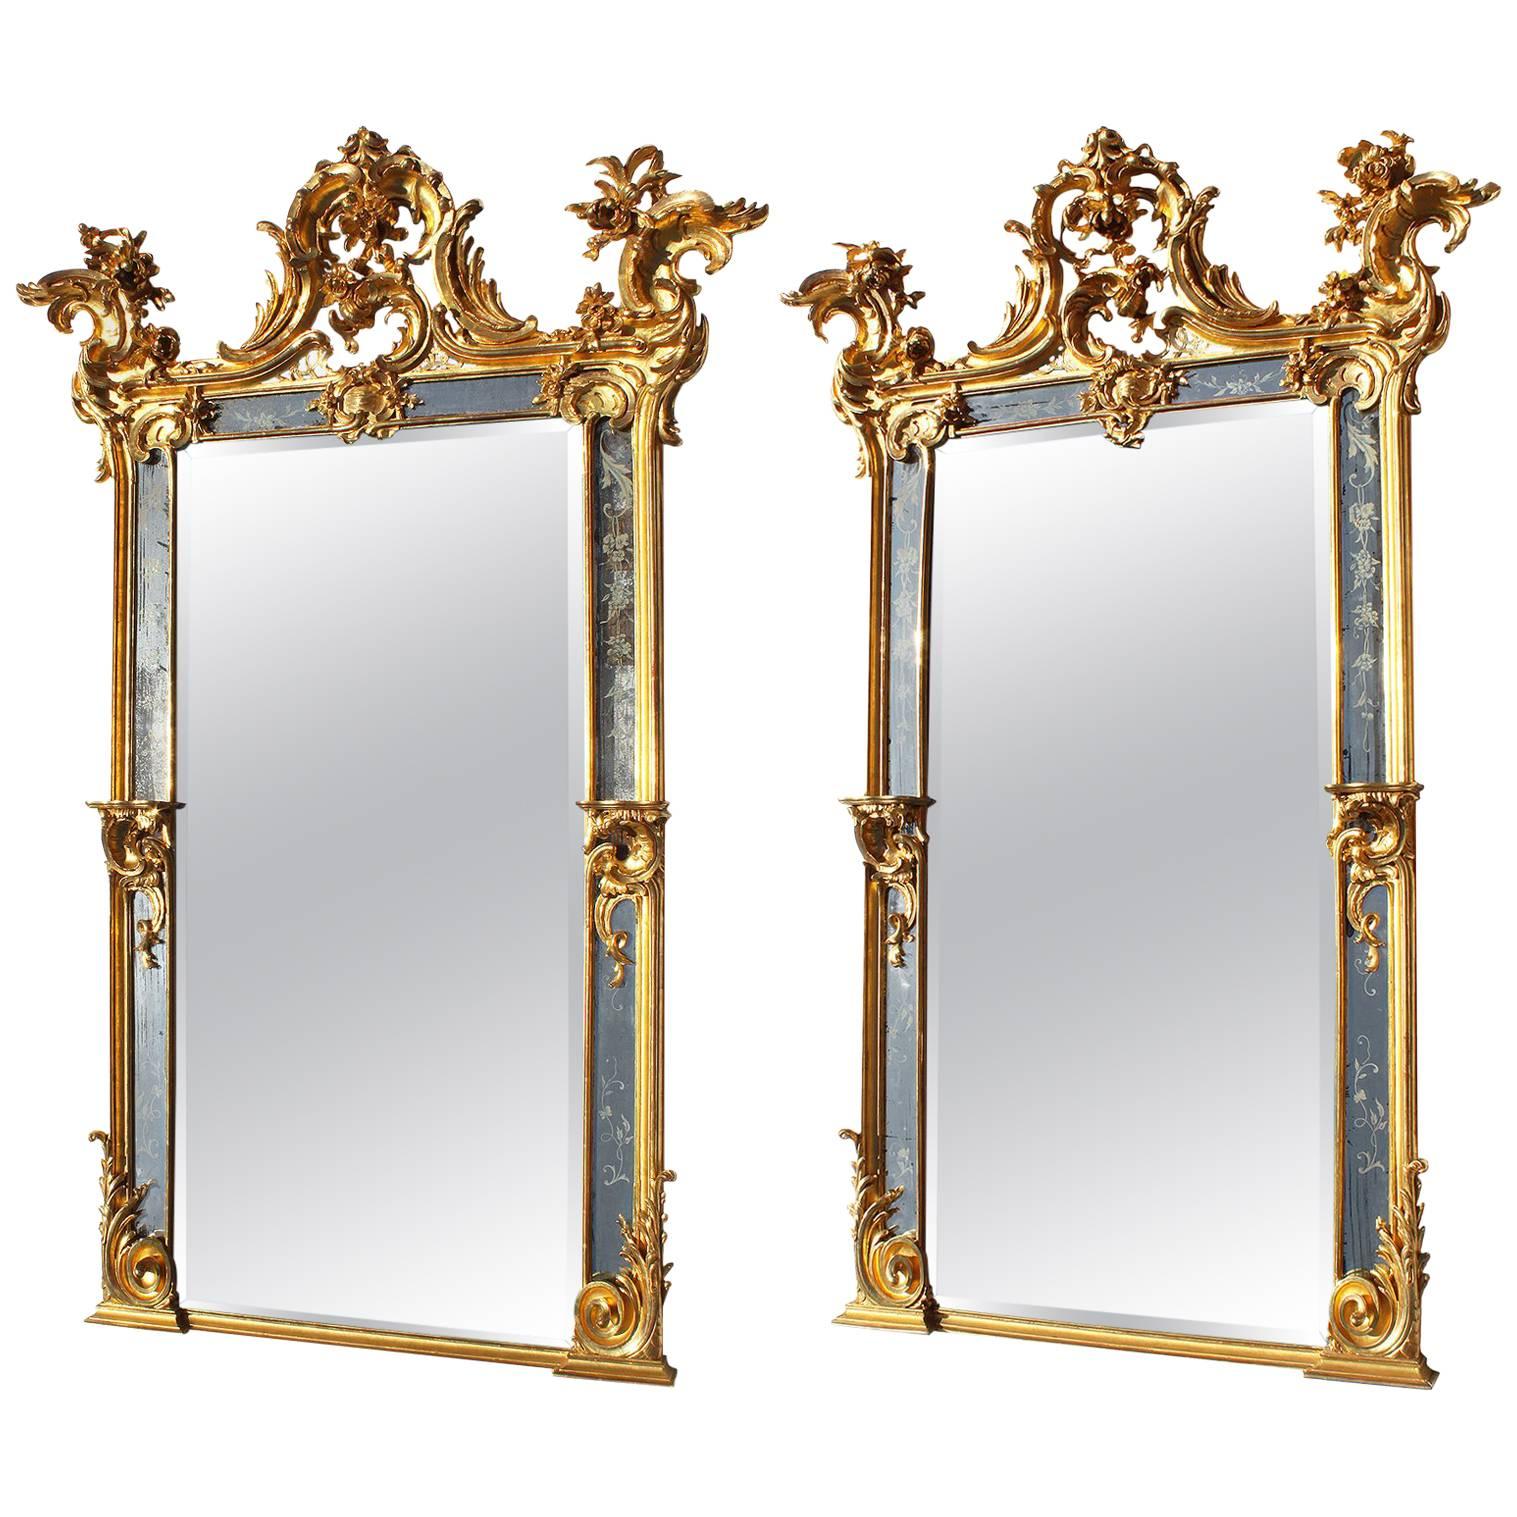 Very Fine Pair of French 19th Century Rococo Style Giltwood Carved Pier Mirrors